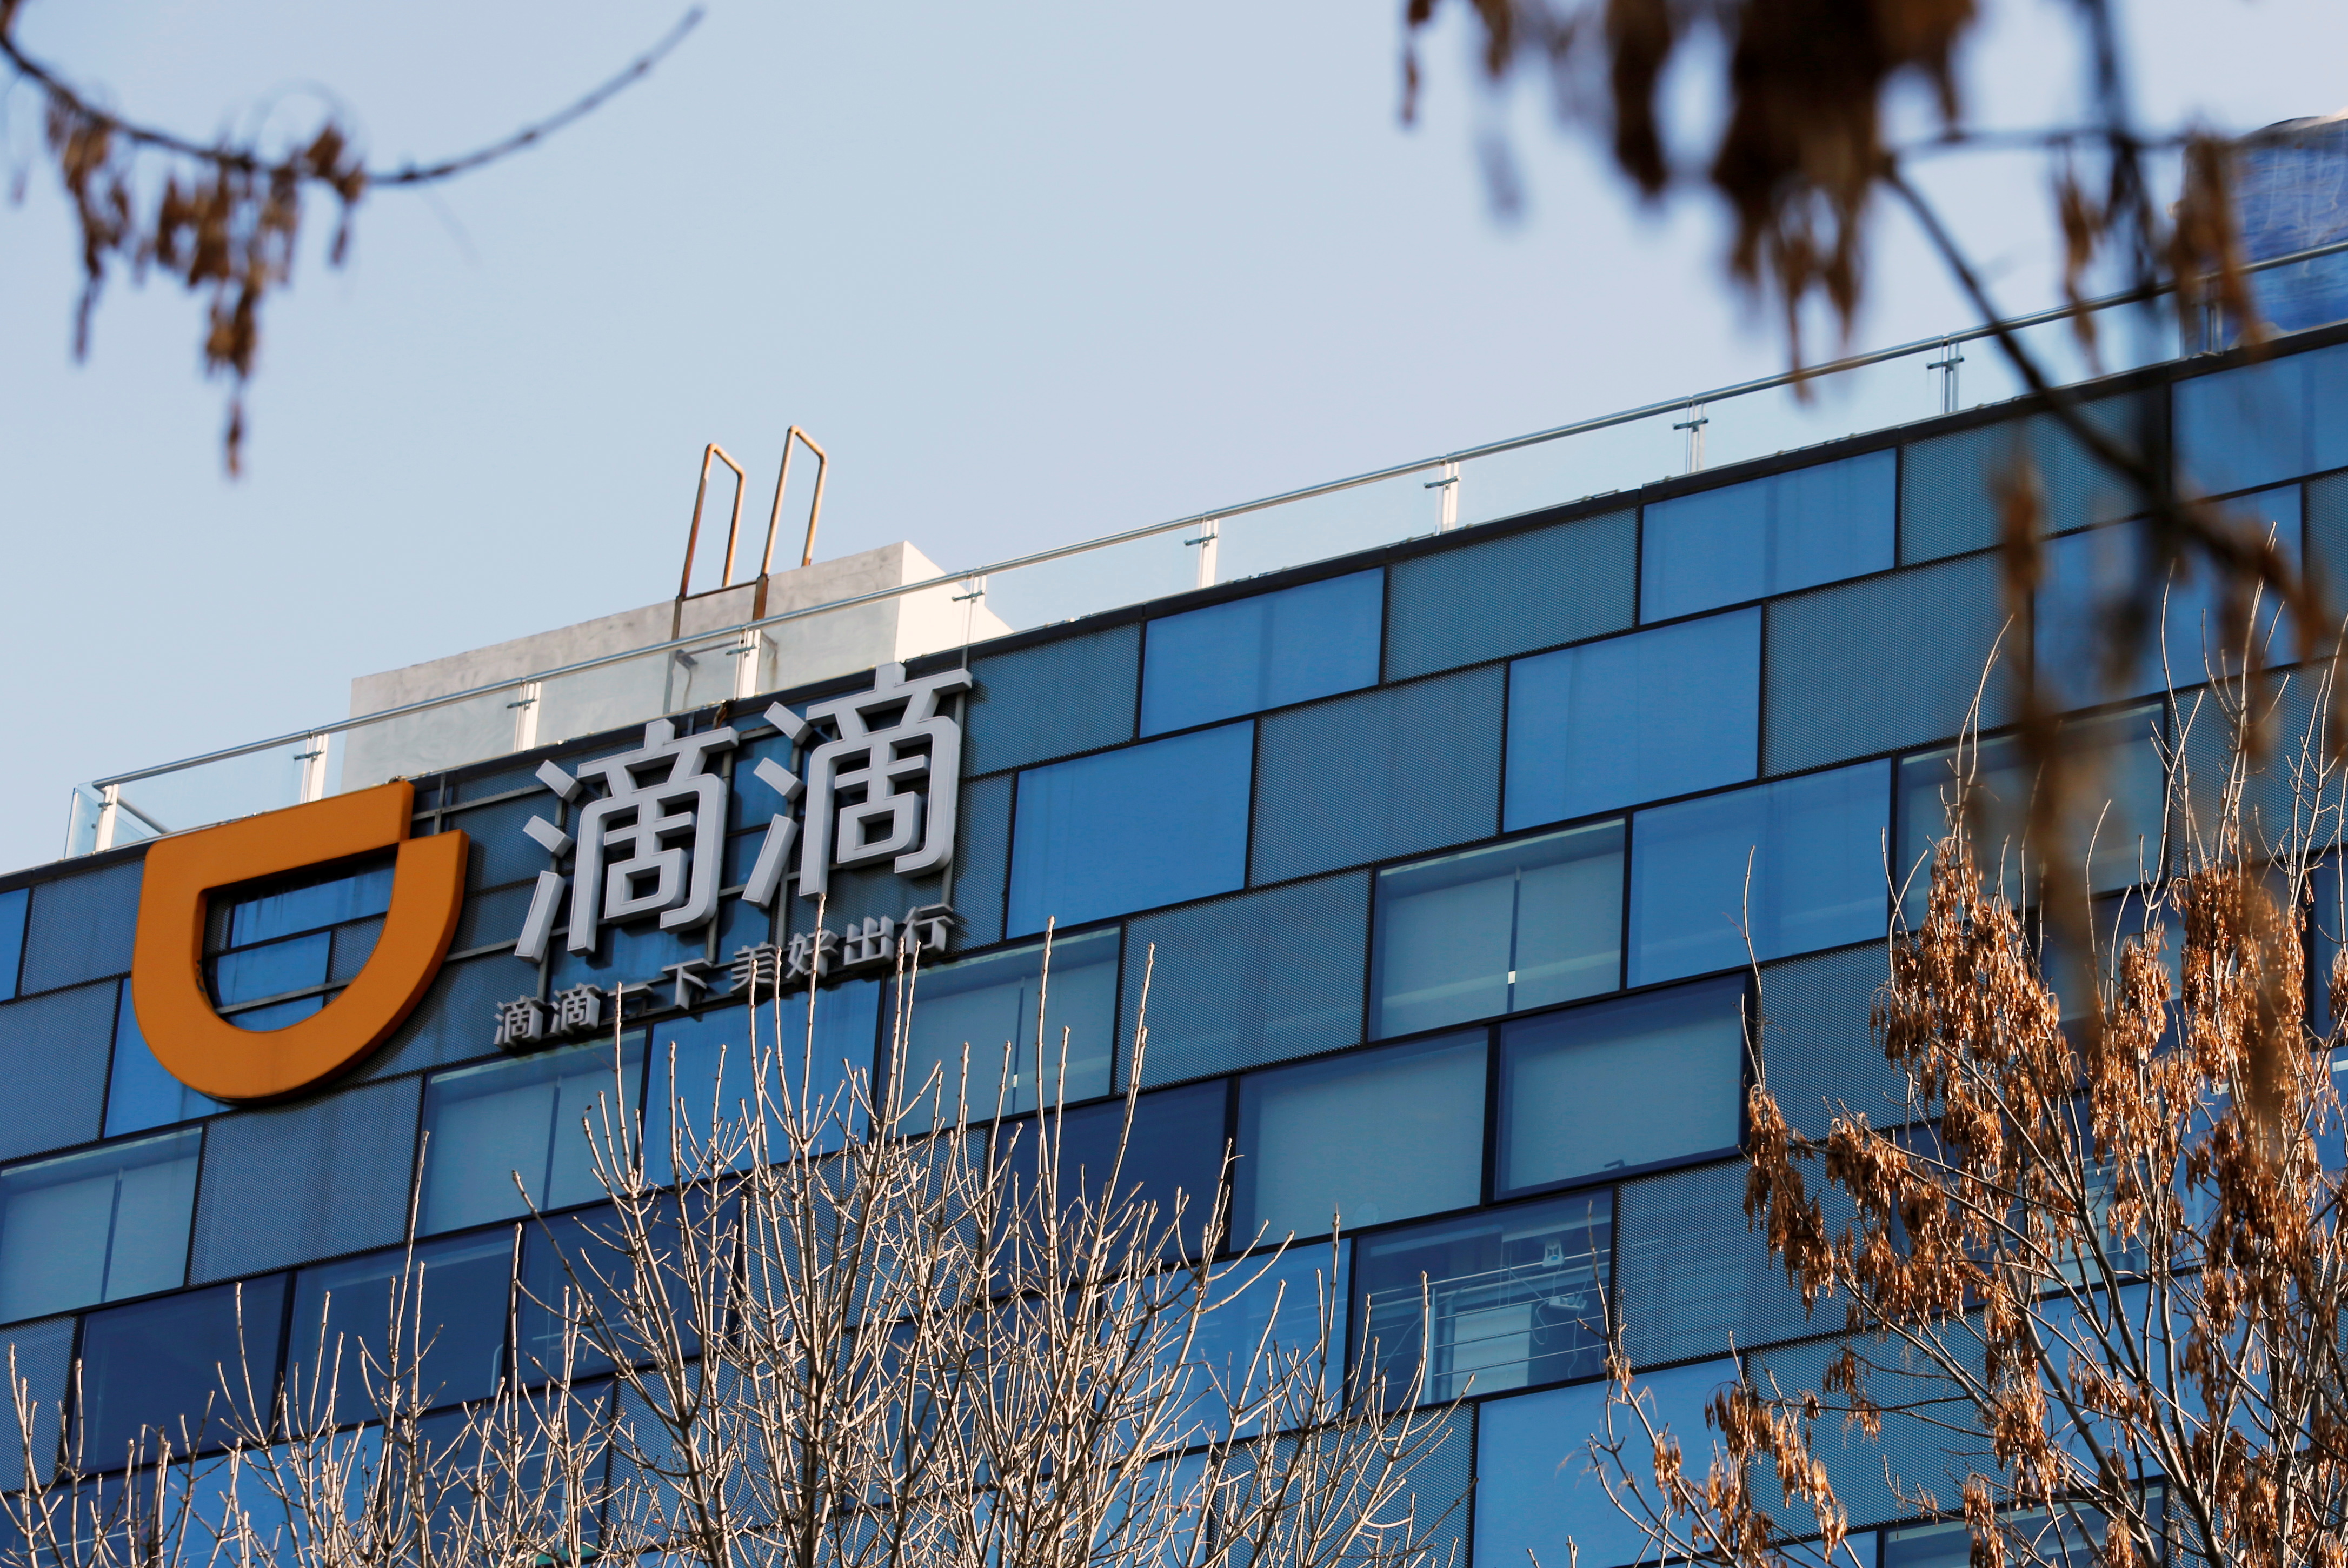 A Didi logo is seen at the headquarters of Didi Chuxing in Beijing, China November 20, 2020. REUTERS/Florence Lo/File Photo